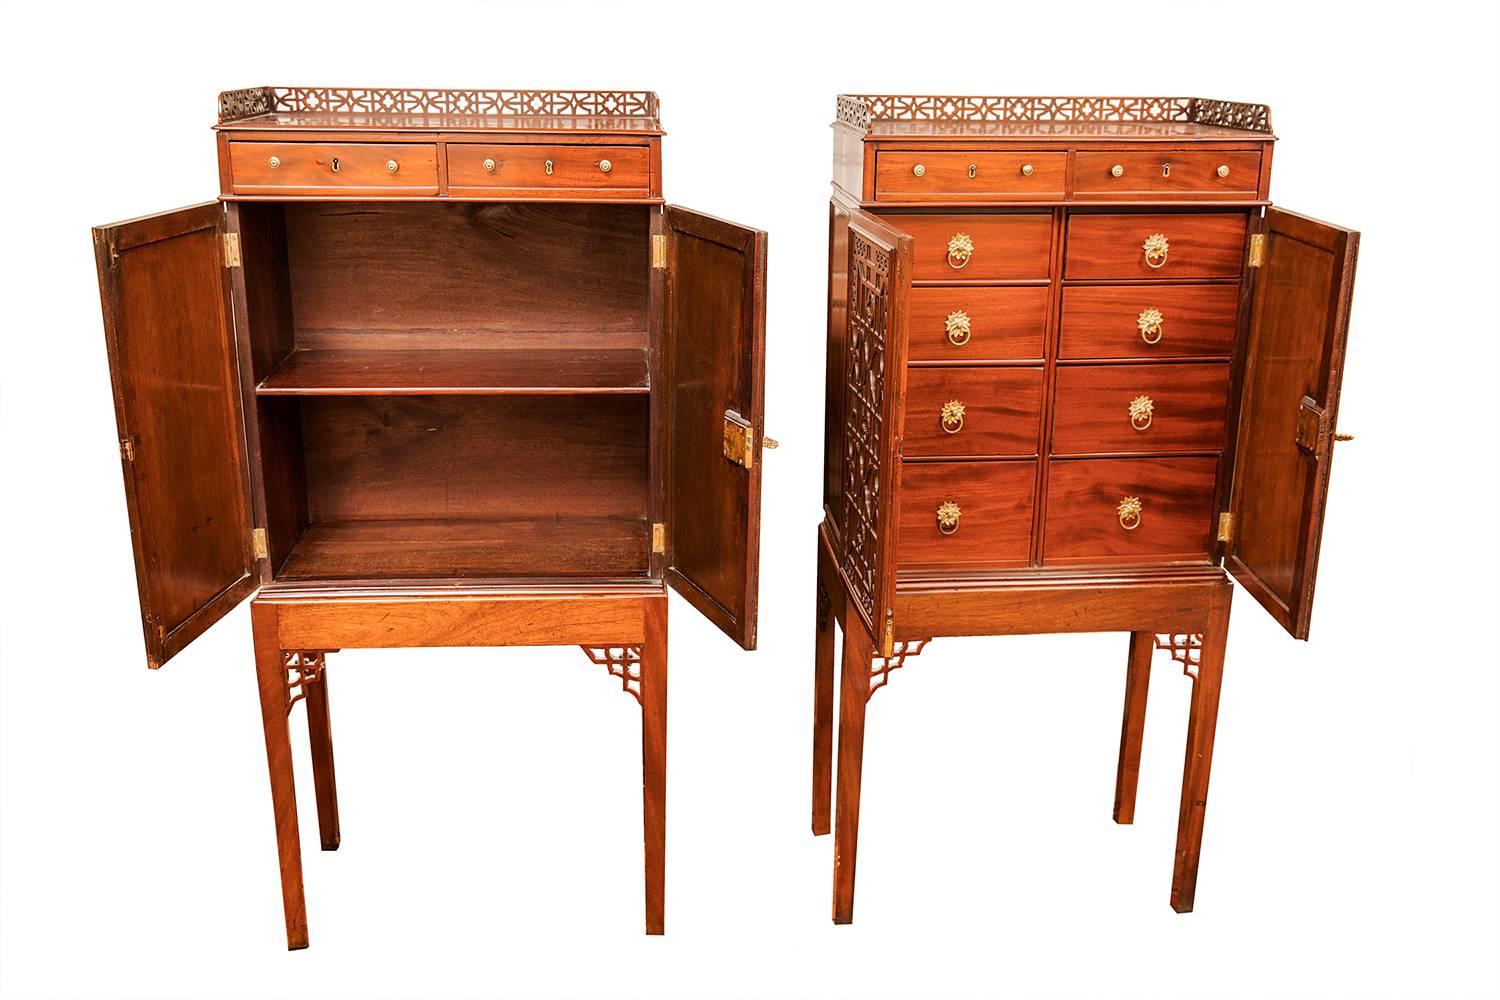 A pair of pierced gallery two-door relief carved small cabinets, one with shelves for books
the other with small drawers supported on stands with pierced brackets and tapered legs.